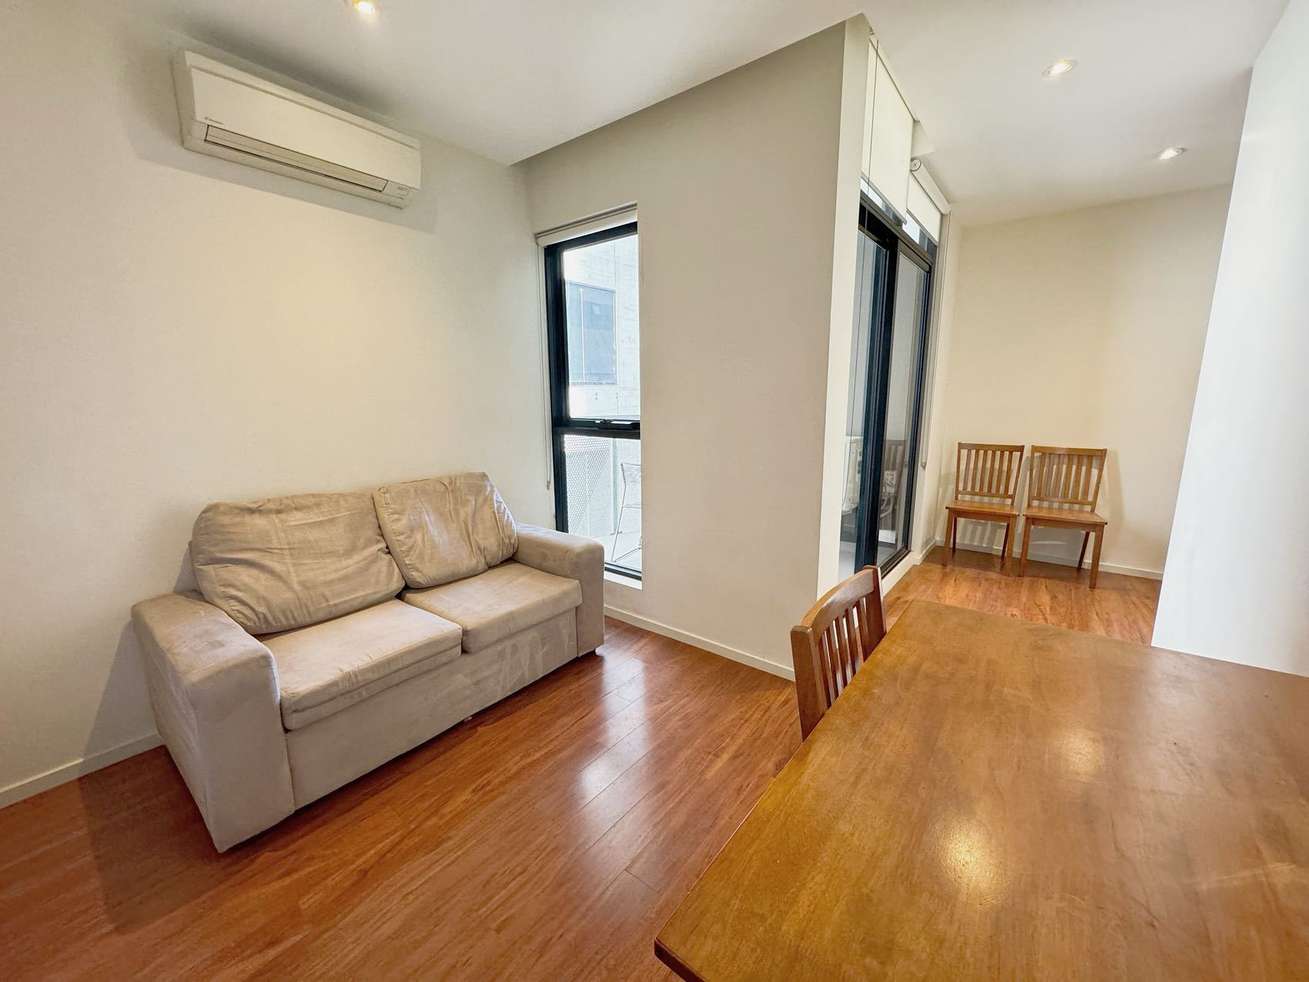 Main view of Homely apartment listing, 2103/380 Little Lonsdale Street, Melbourne VIC 3000